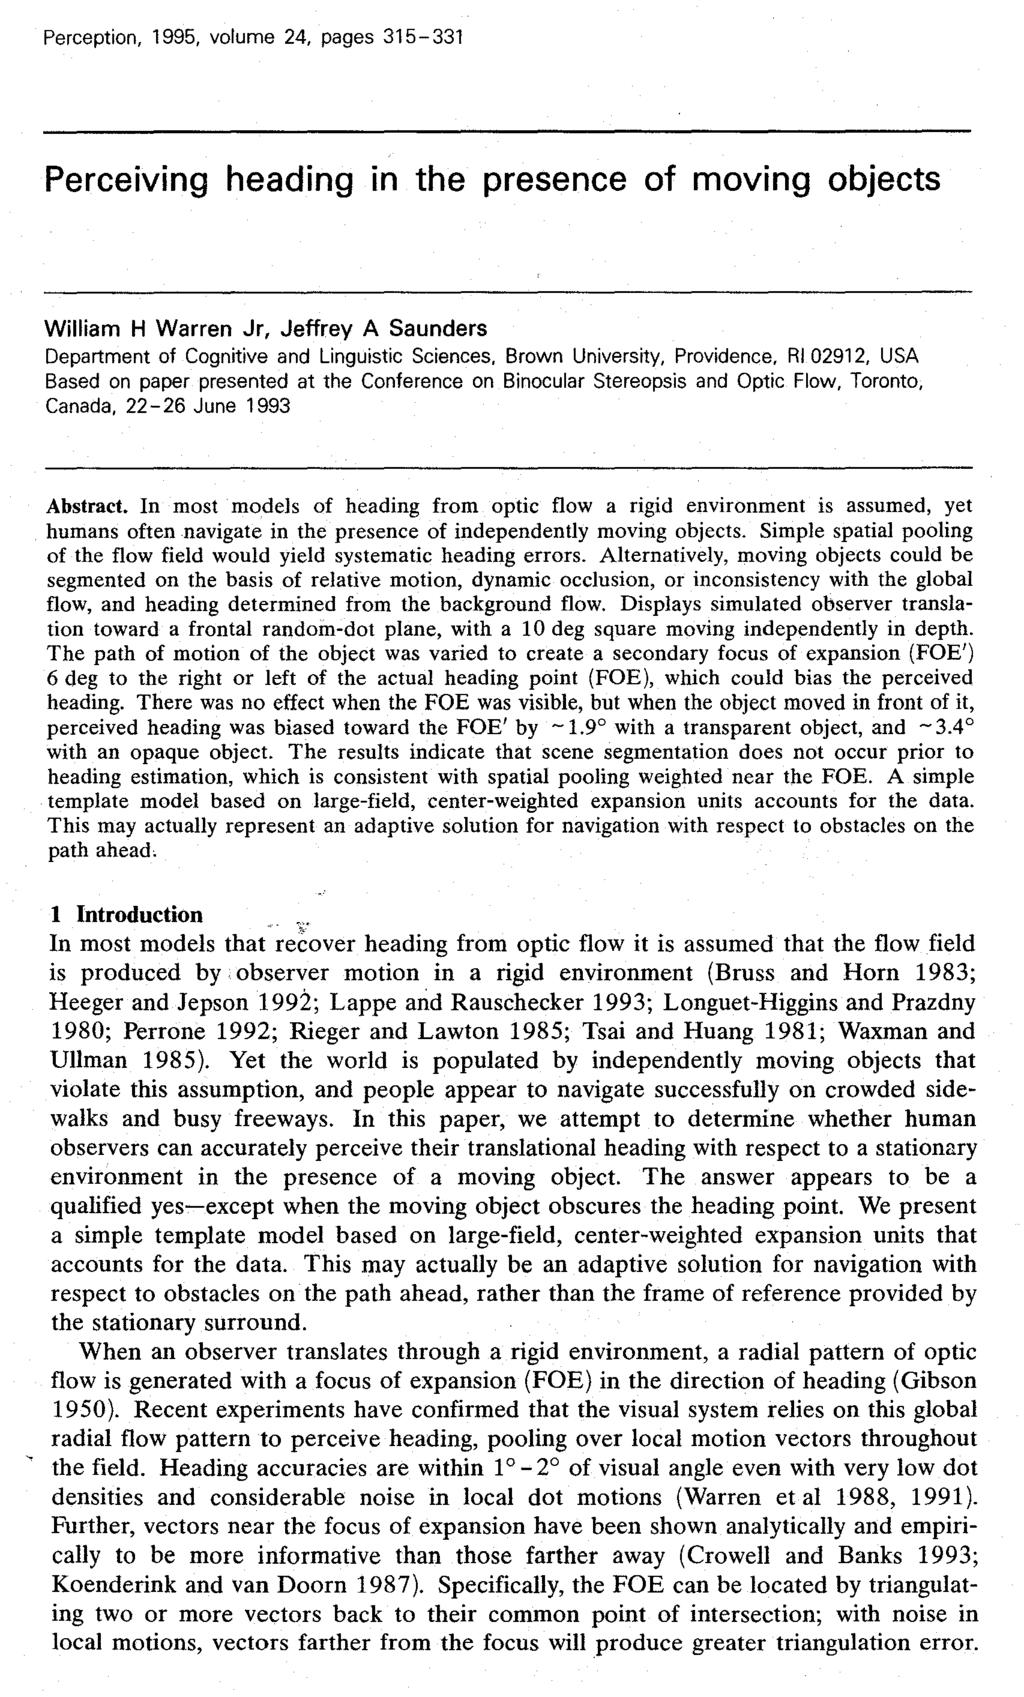 Perception, 1995, volume 24, pages 315-331 Perceiving heading in the presence of moving objects William H Warren Jr, Jeffrey A Saunders Department of Cognitive and Linguistic Sciences, Brown